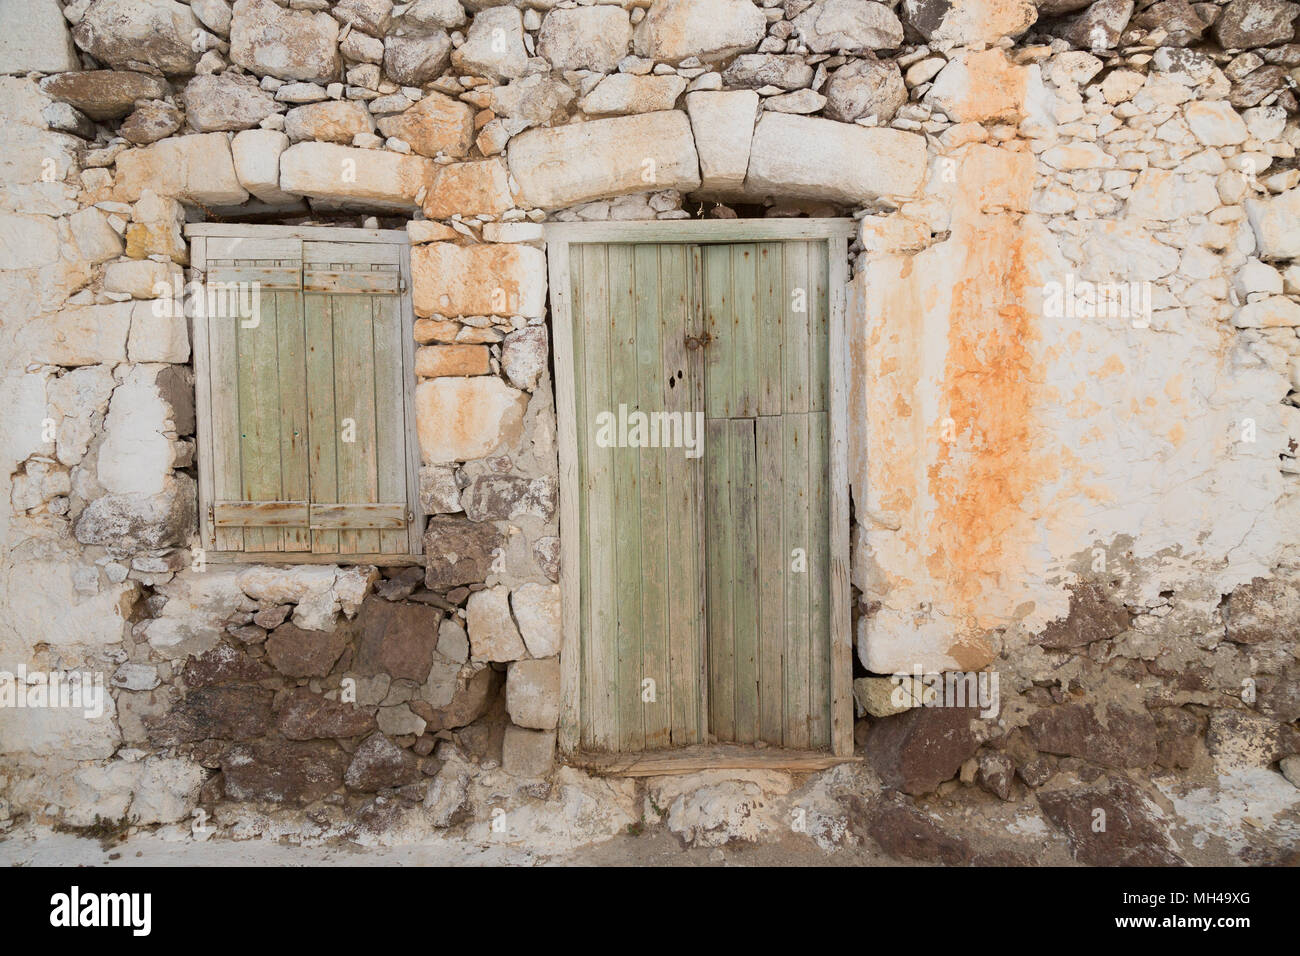 old crumbling rock house with wooden doors Stock Photo